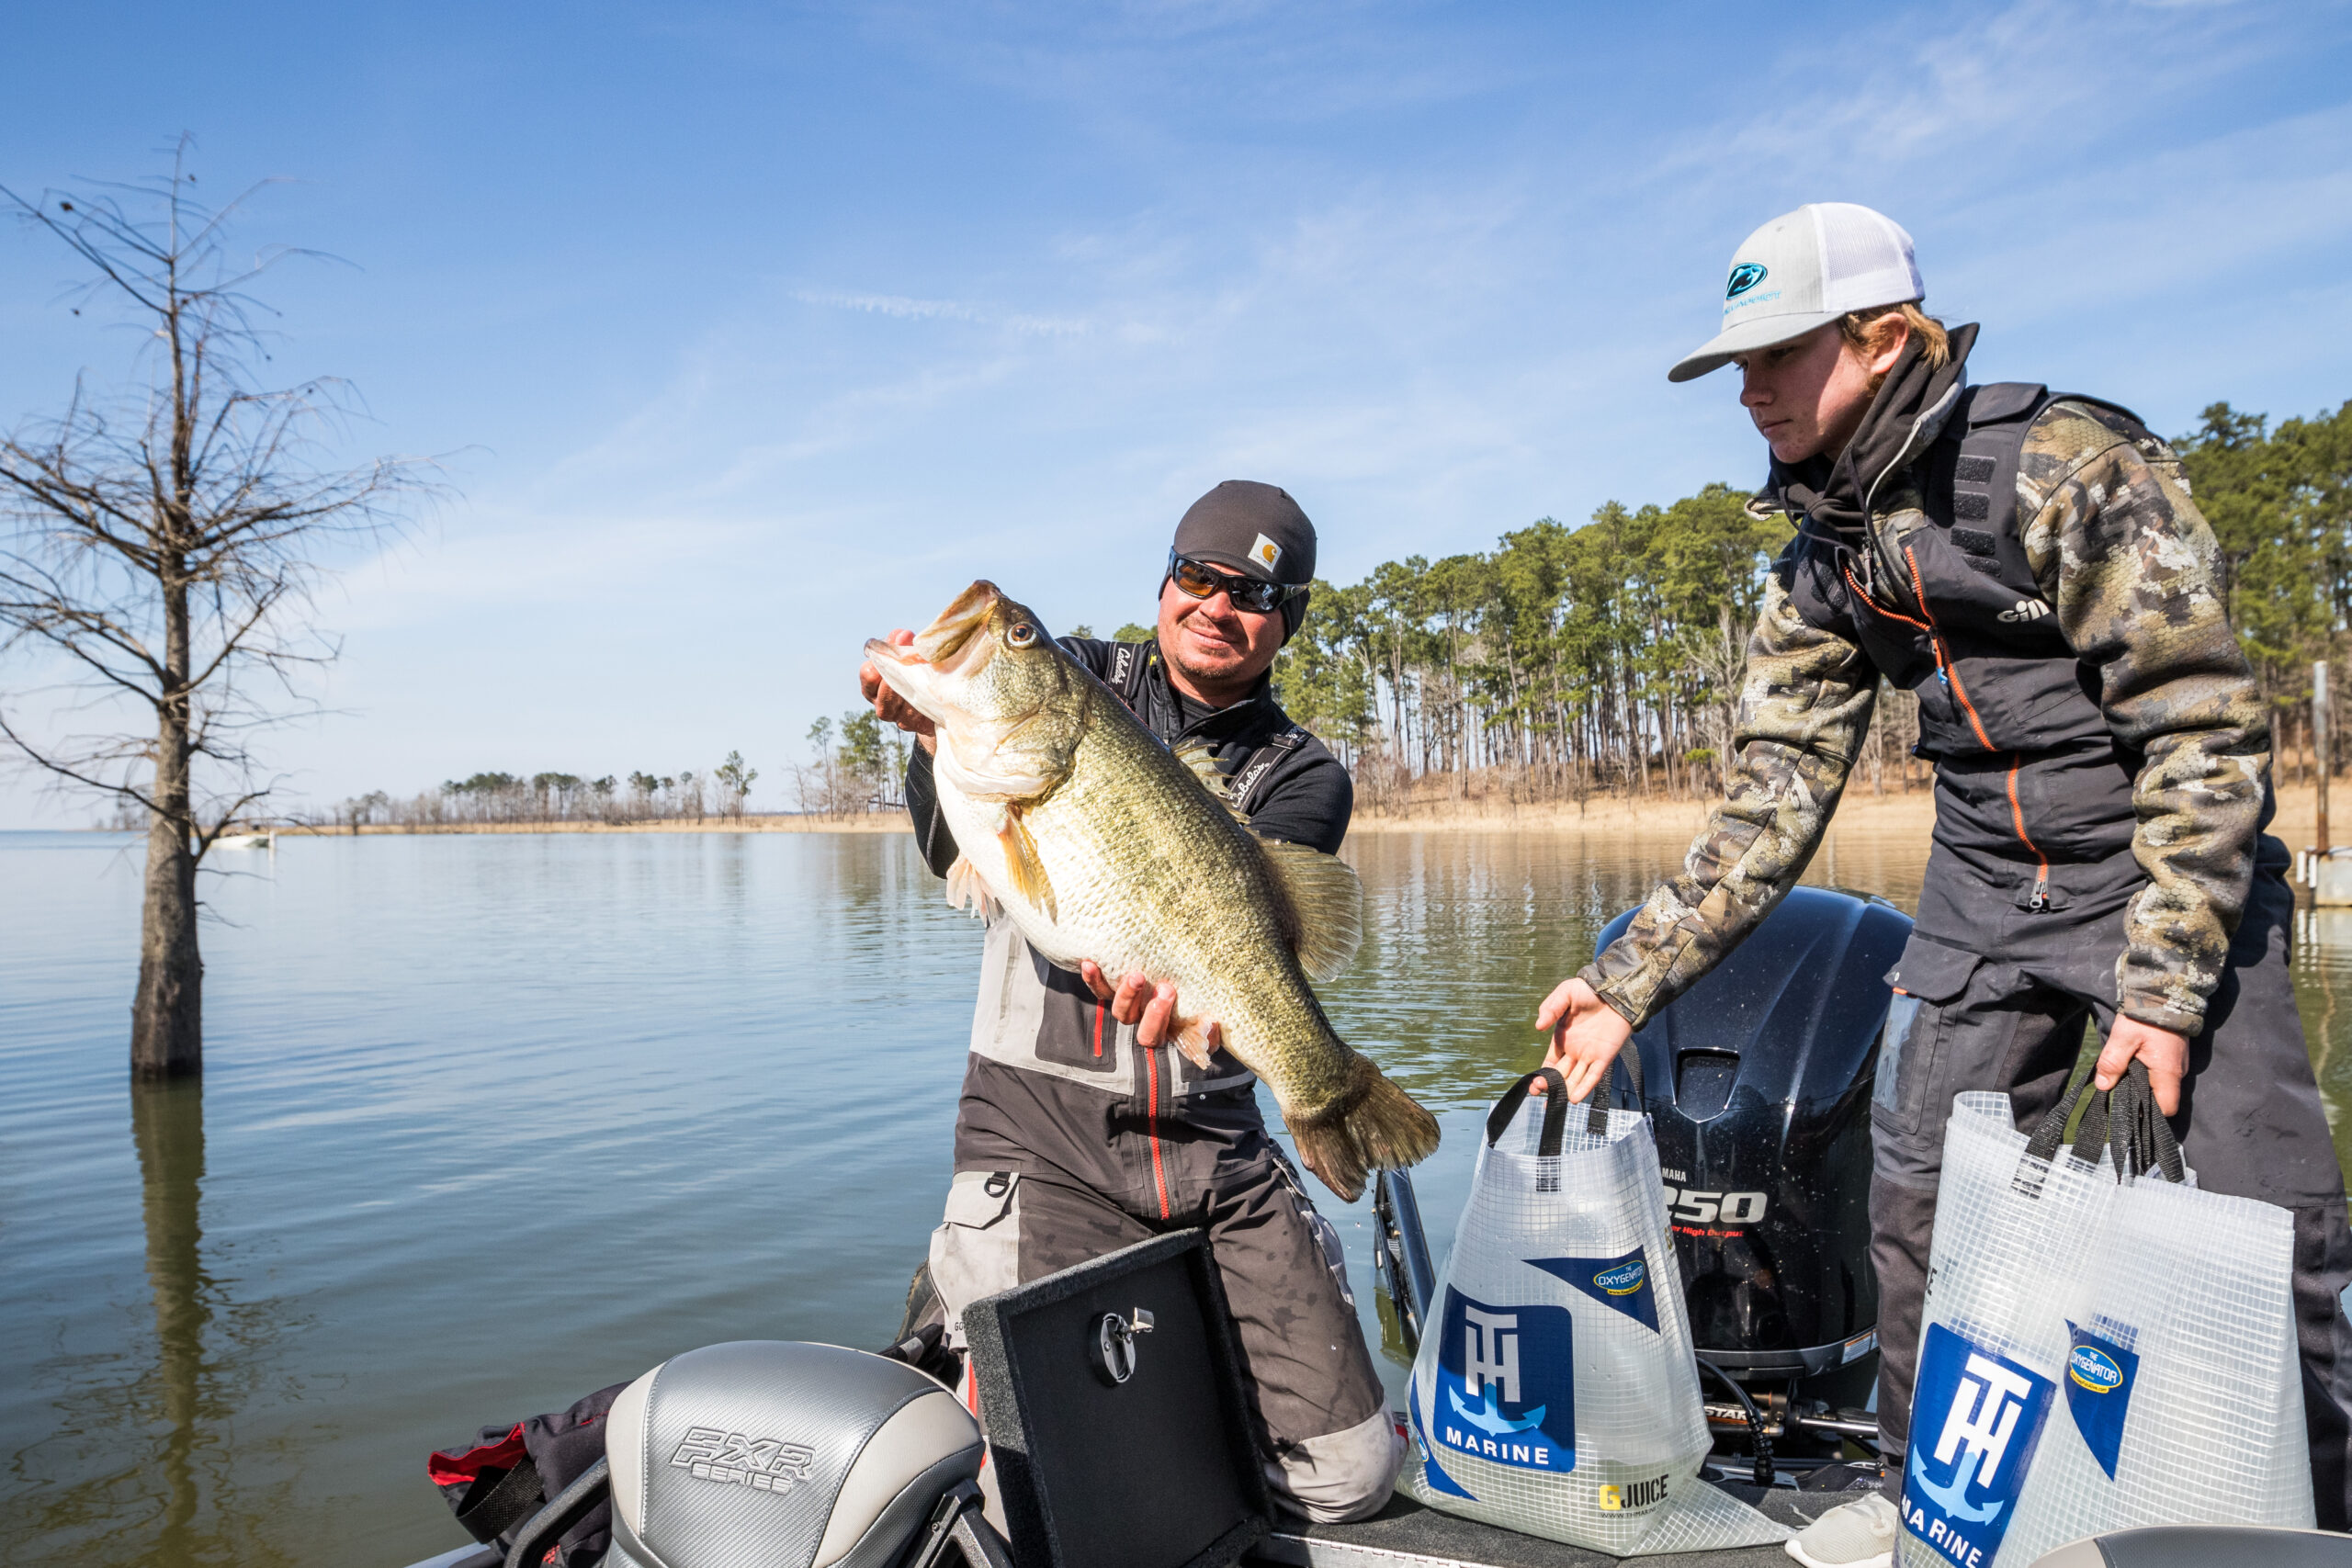 2021: What We'll Remember From the Year That Was - Major League Fishing